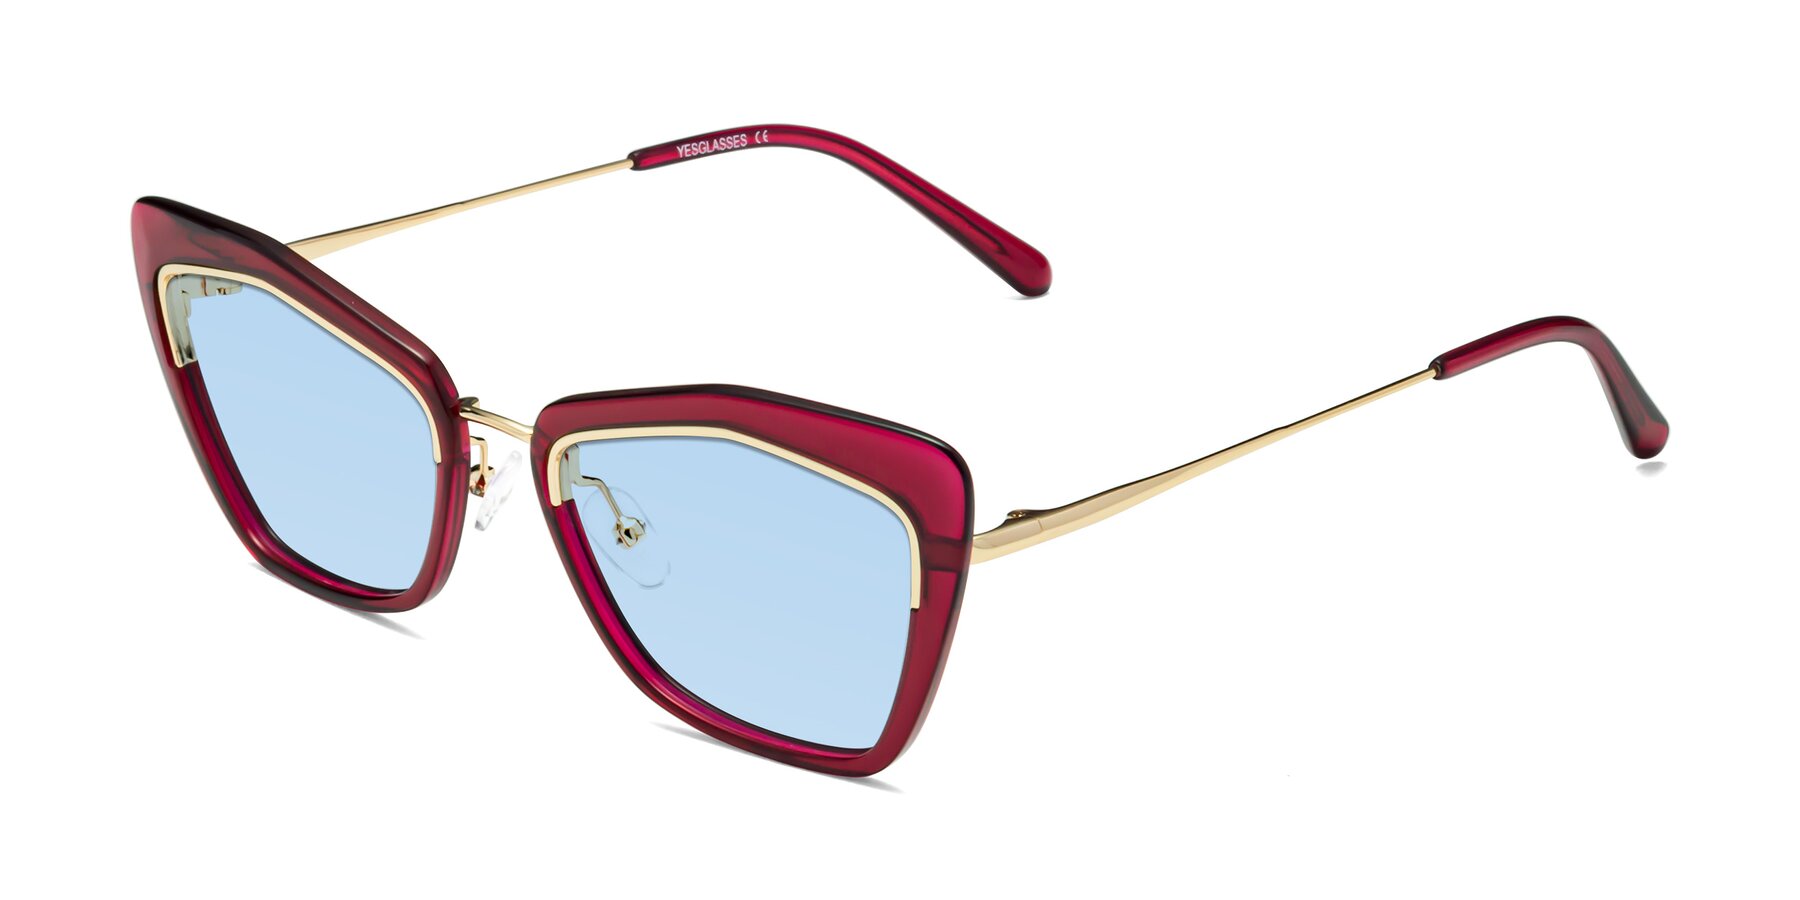 Angle of Lasso in Wine with Light Blue Tinted Lenses